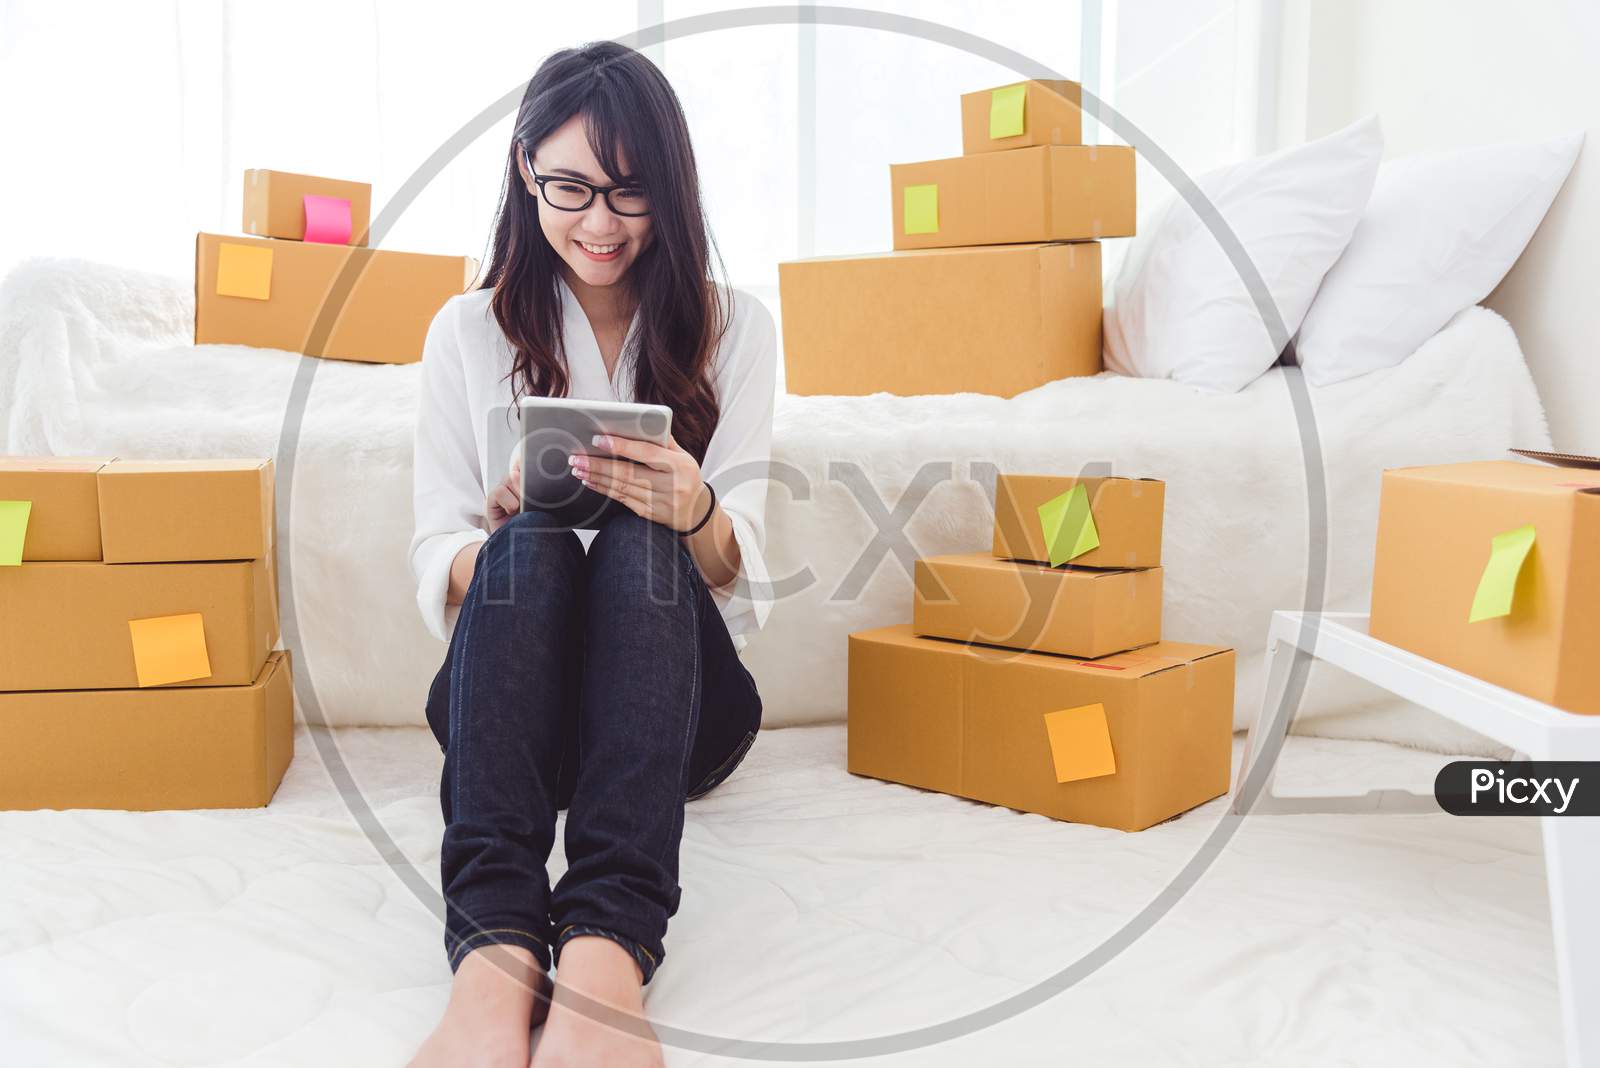 Beauty Asian Woman Using Tablet And Start Up Small Business Entrepreneur Sme And Checking Order List In Bedroom, Young Happy Freelance Woman Shopping Online Marketing Or Sending Parcel To Customers